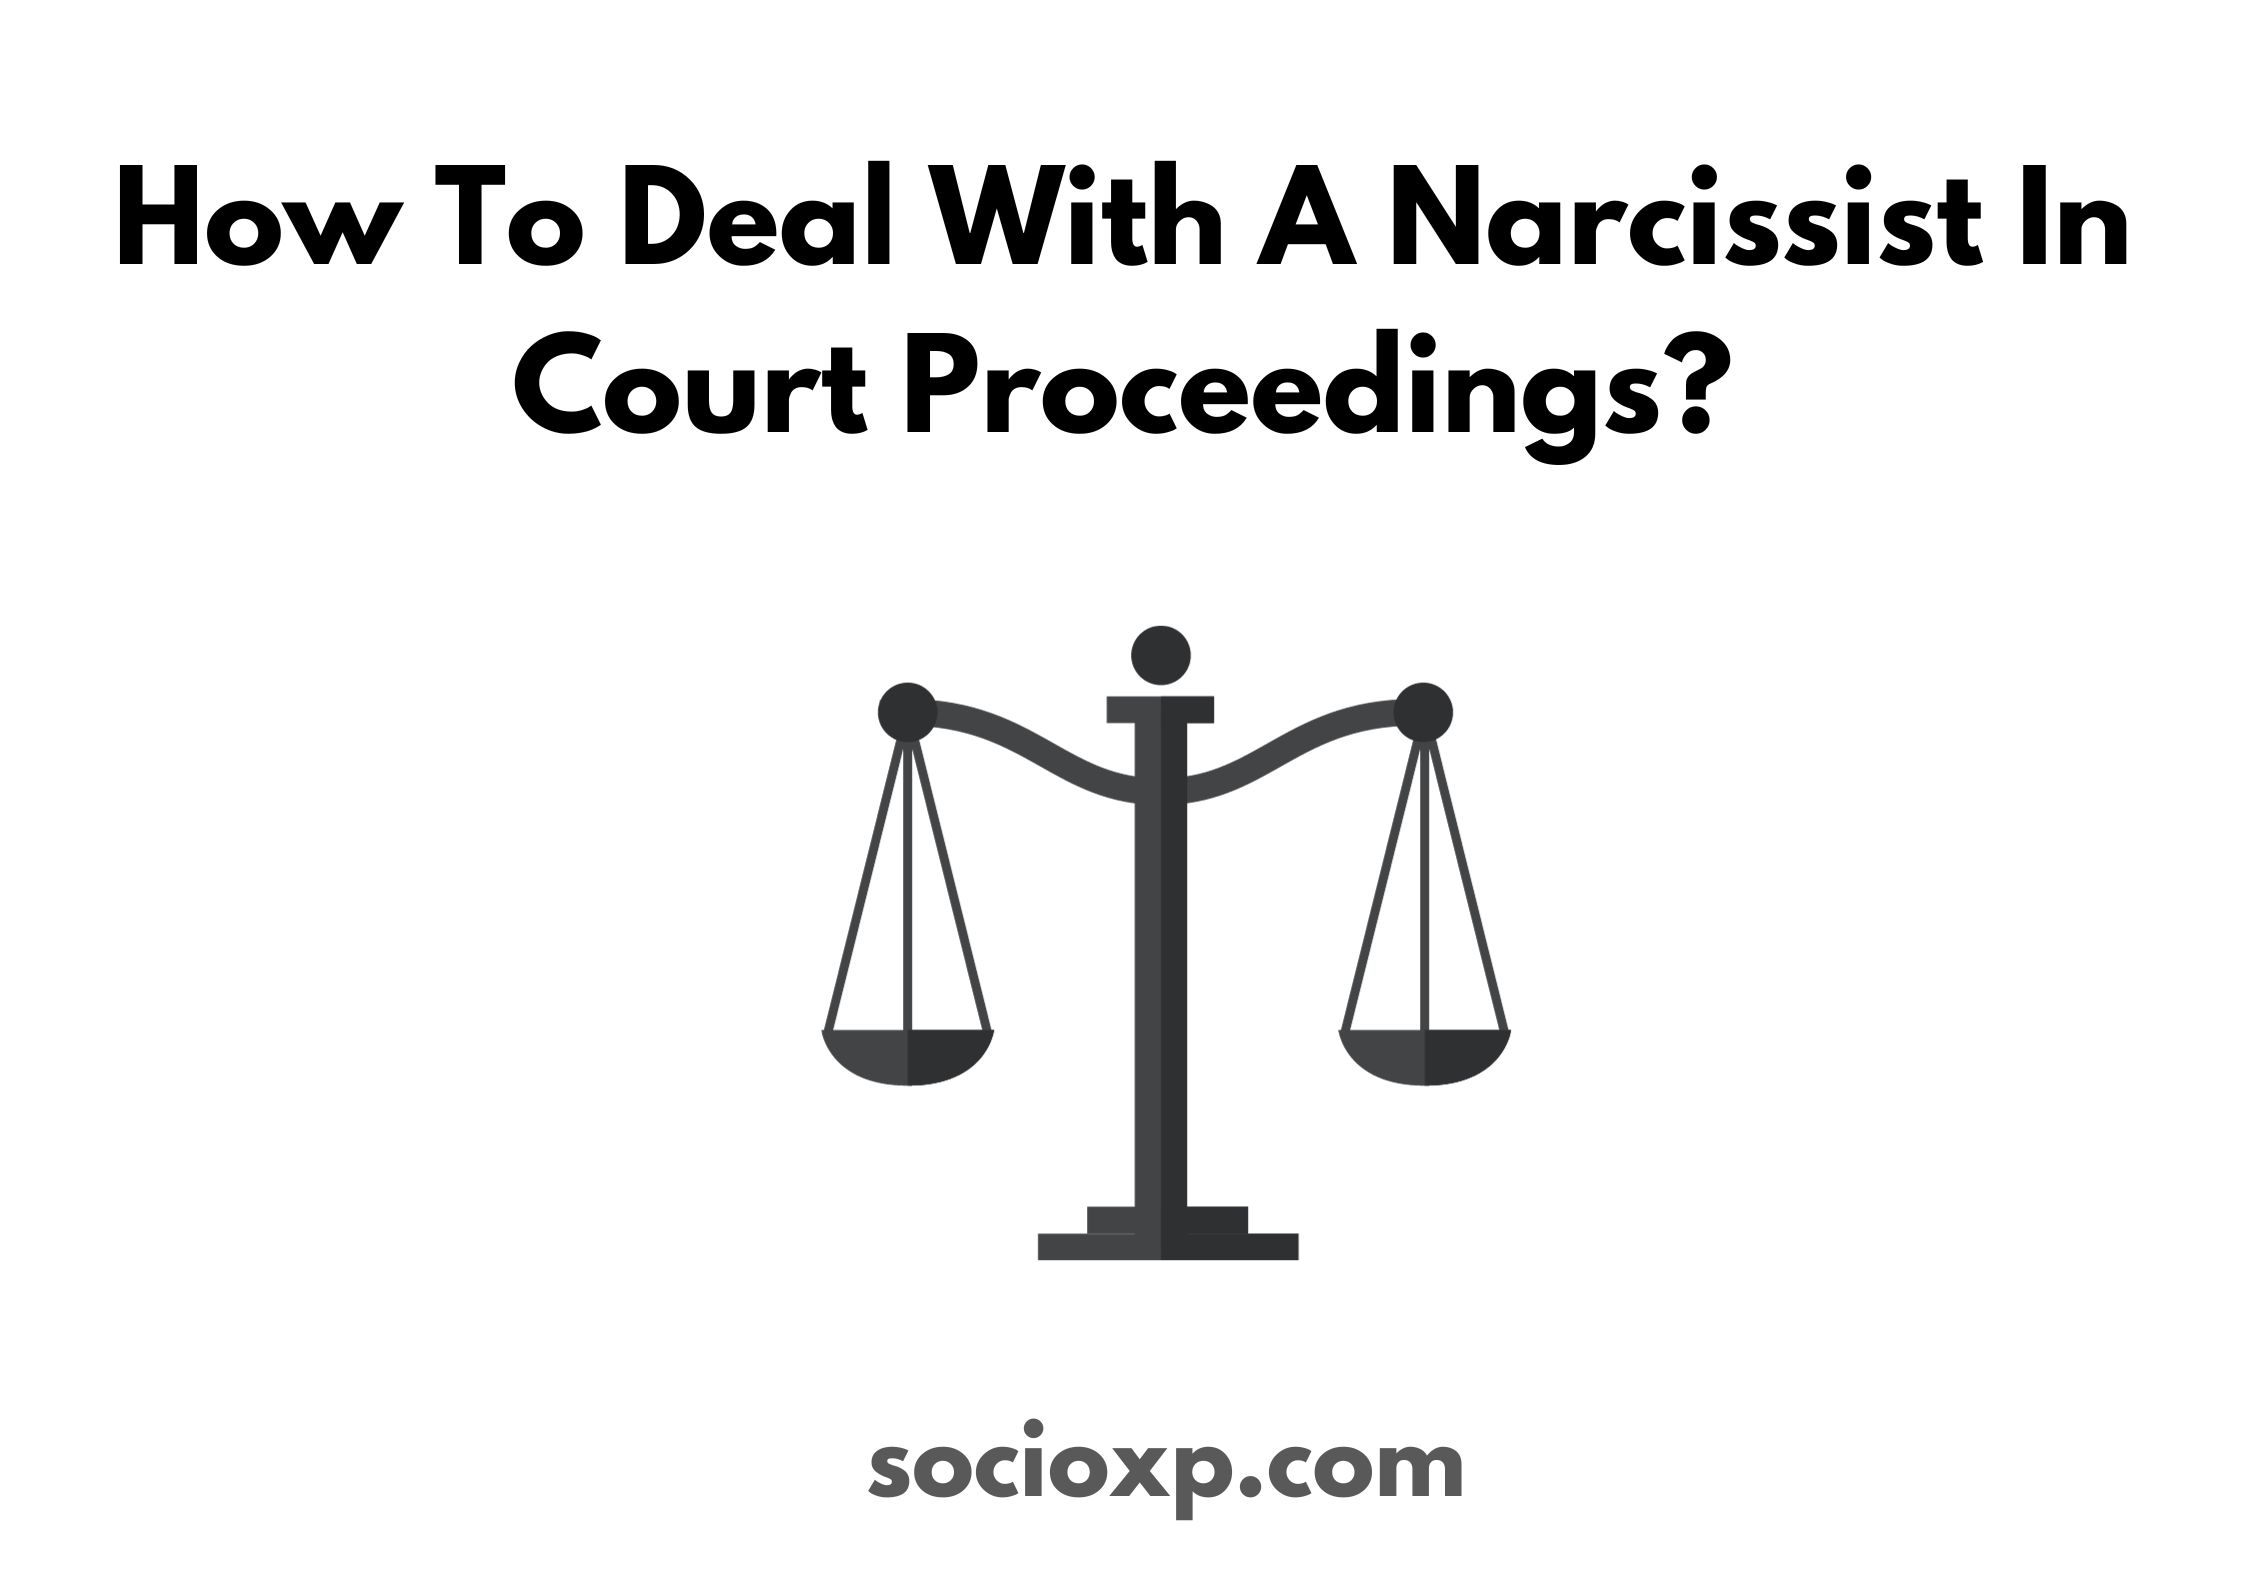 How To Deal With A Narcissist In Court Proceedings?